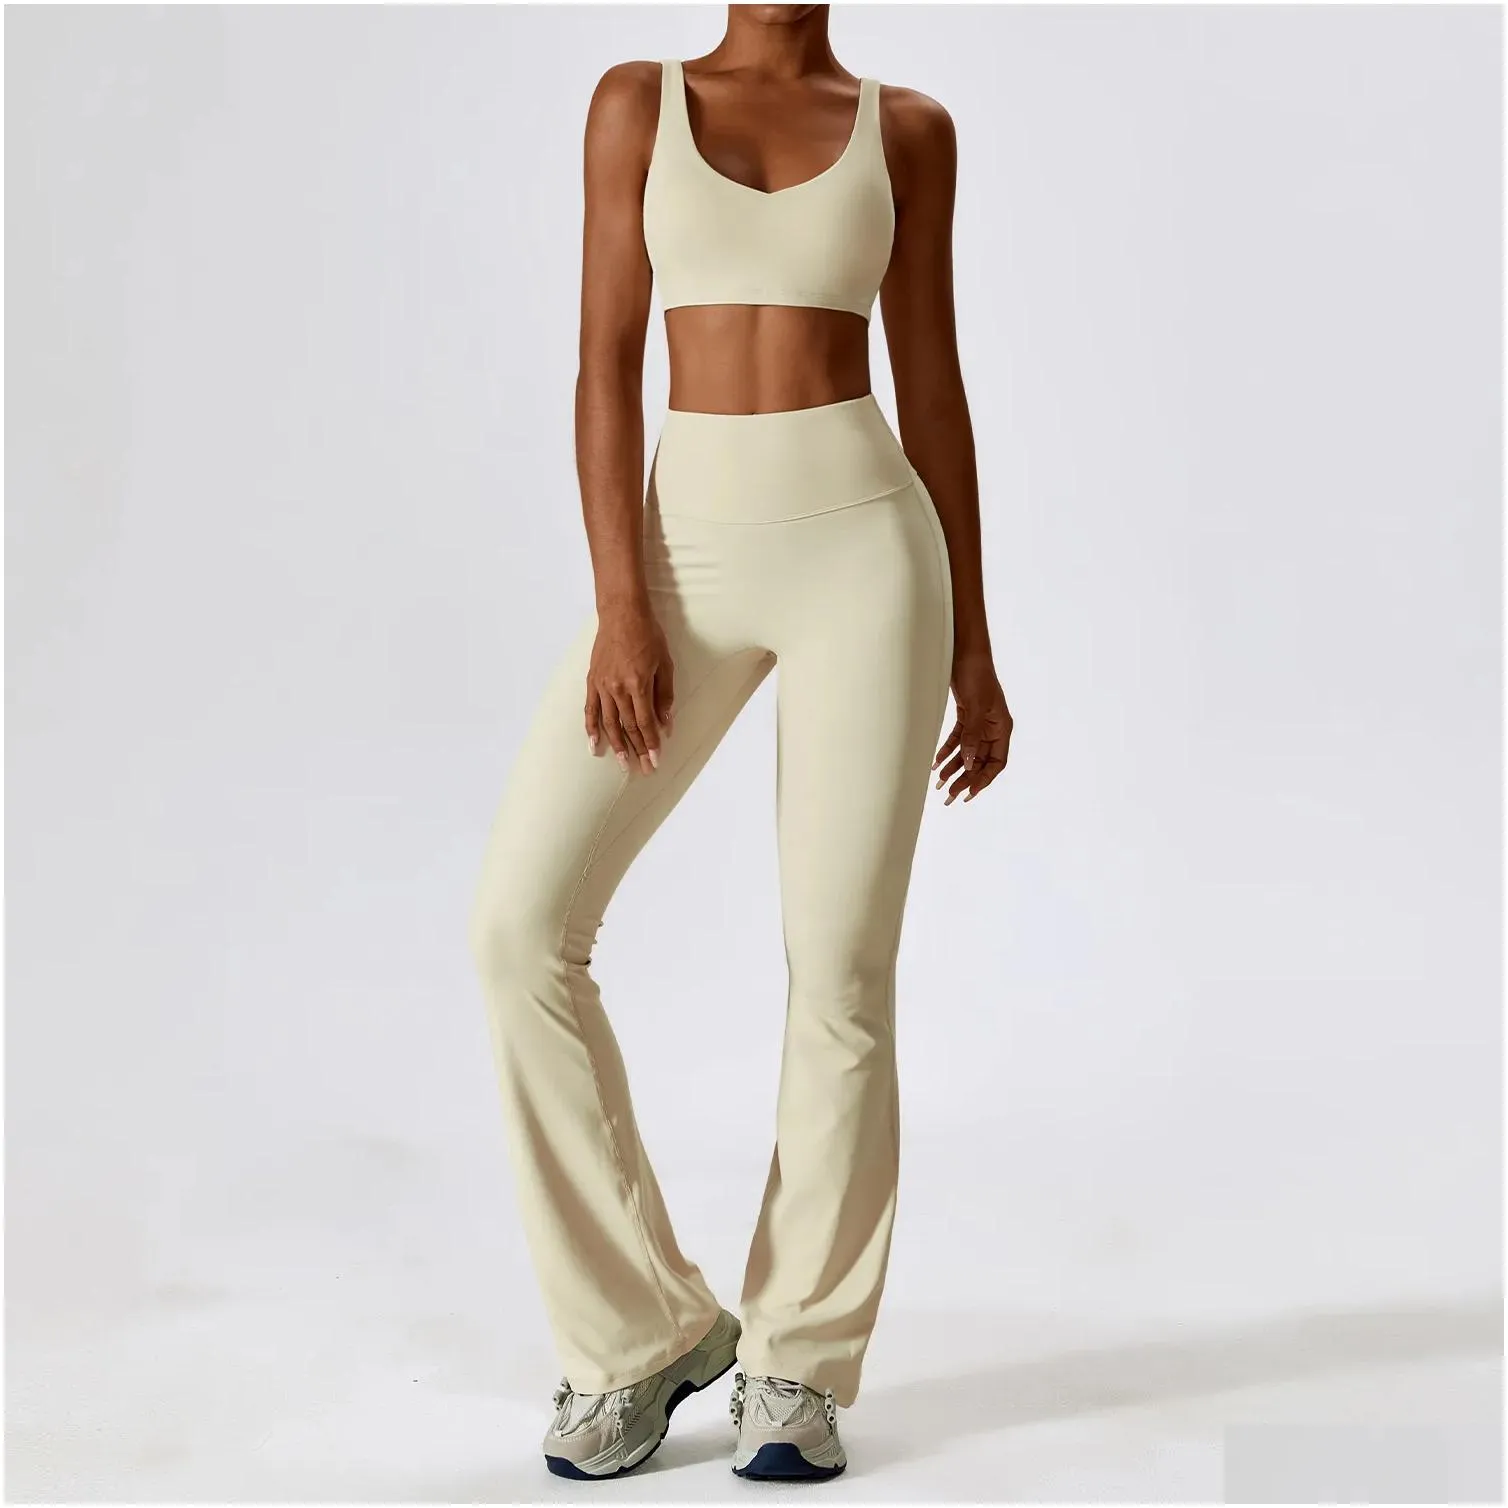 LL-8232 Womens Yoga Outfit Yoga Sets Vest Sleeveless Tops Pants Bell-bottom Trousers Excerise Sport Gym Running Long Pant Elastic High Waist